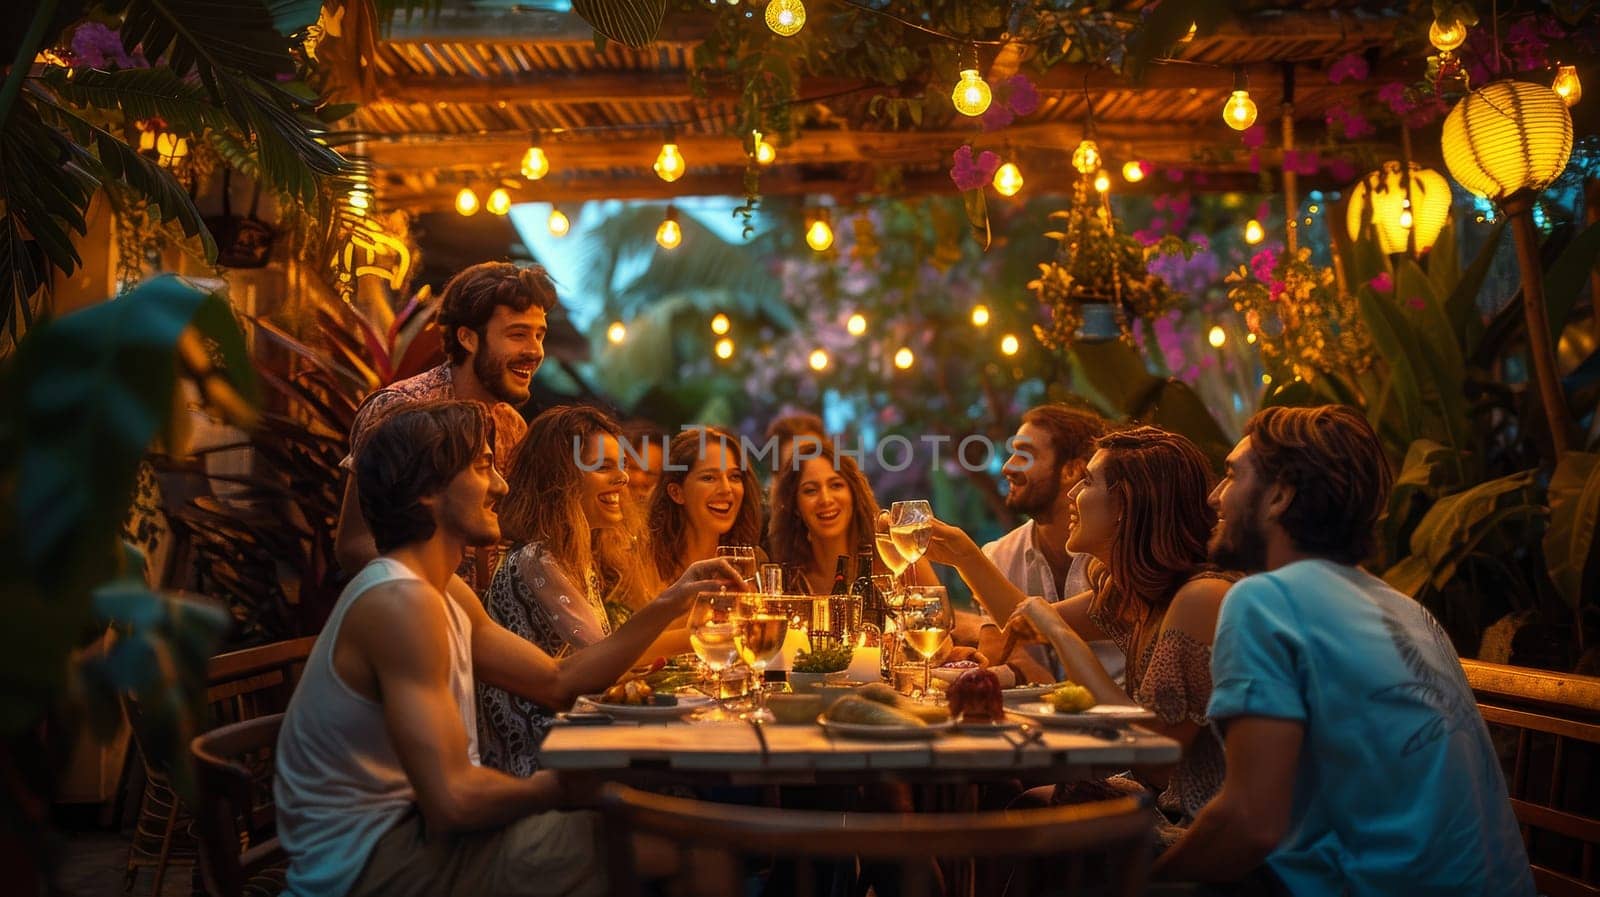 A group of people are gathered around a table with wine glasses and food. Scene is happy and social, as everyone is enjoying each other's company and sharing a meal together